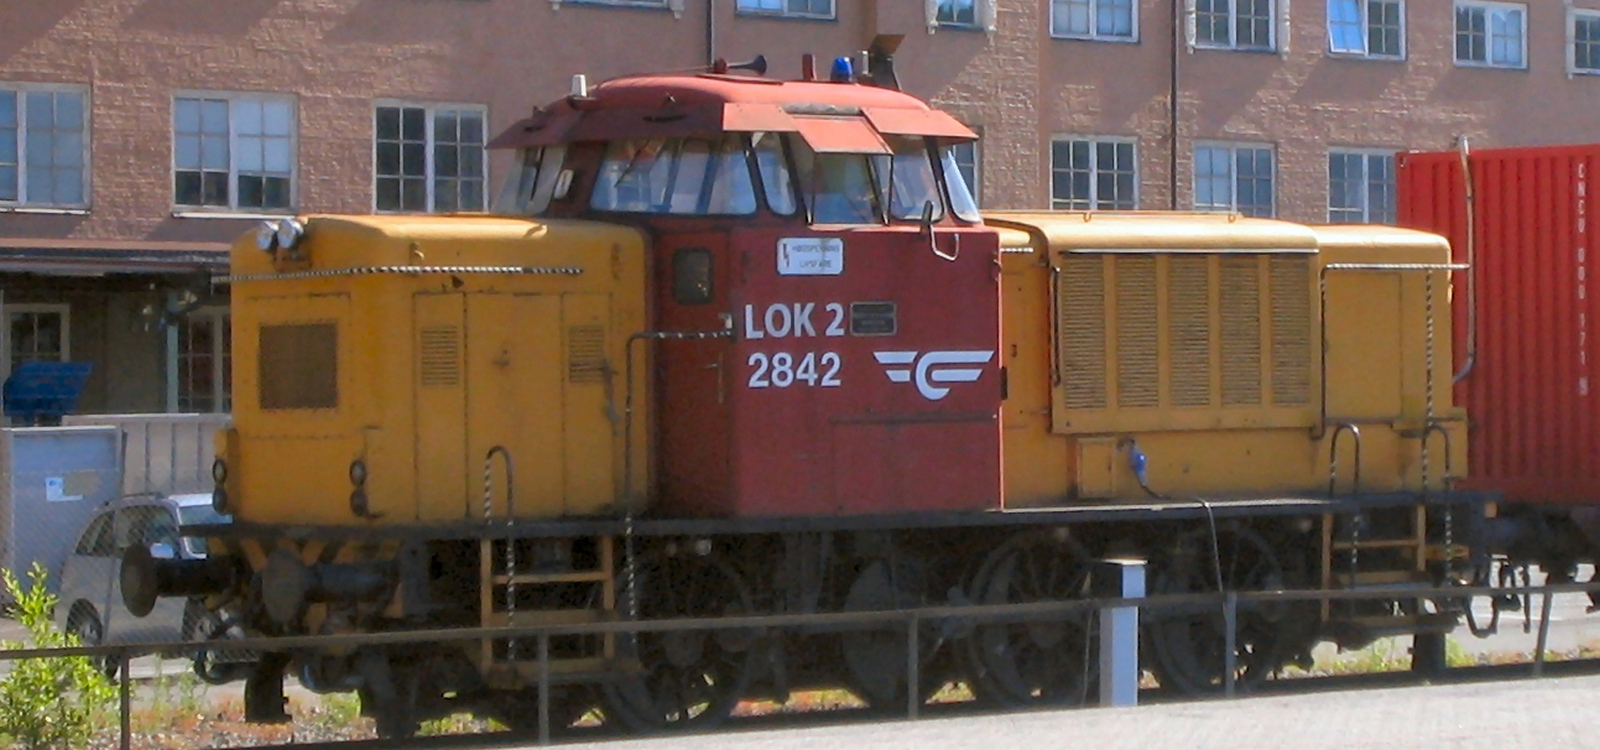 No. 2842 in June 2006 at Oslo Central Station